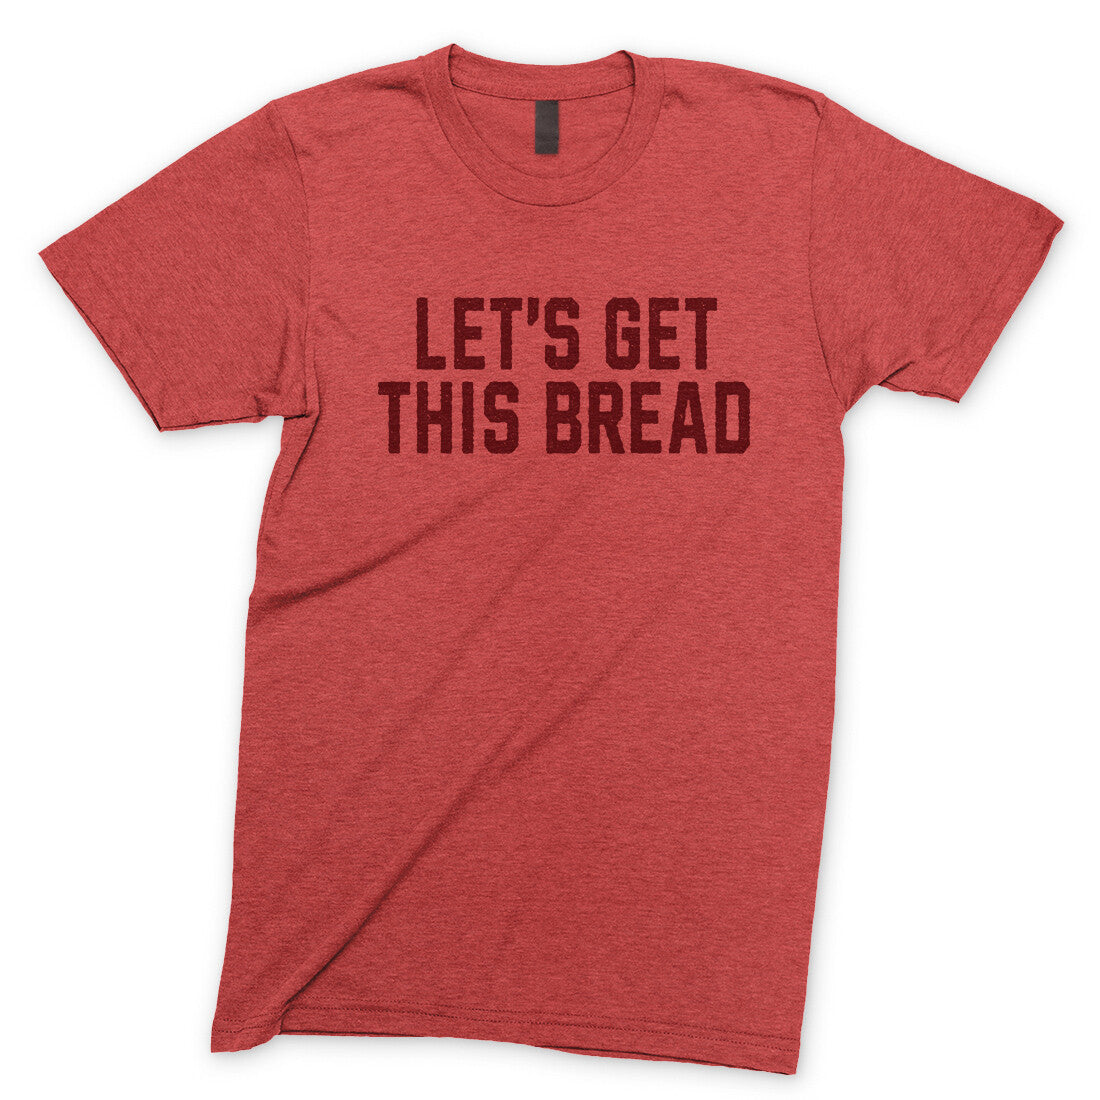 Let's Get This Bread in Heather Red Color